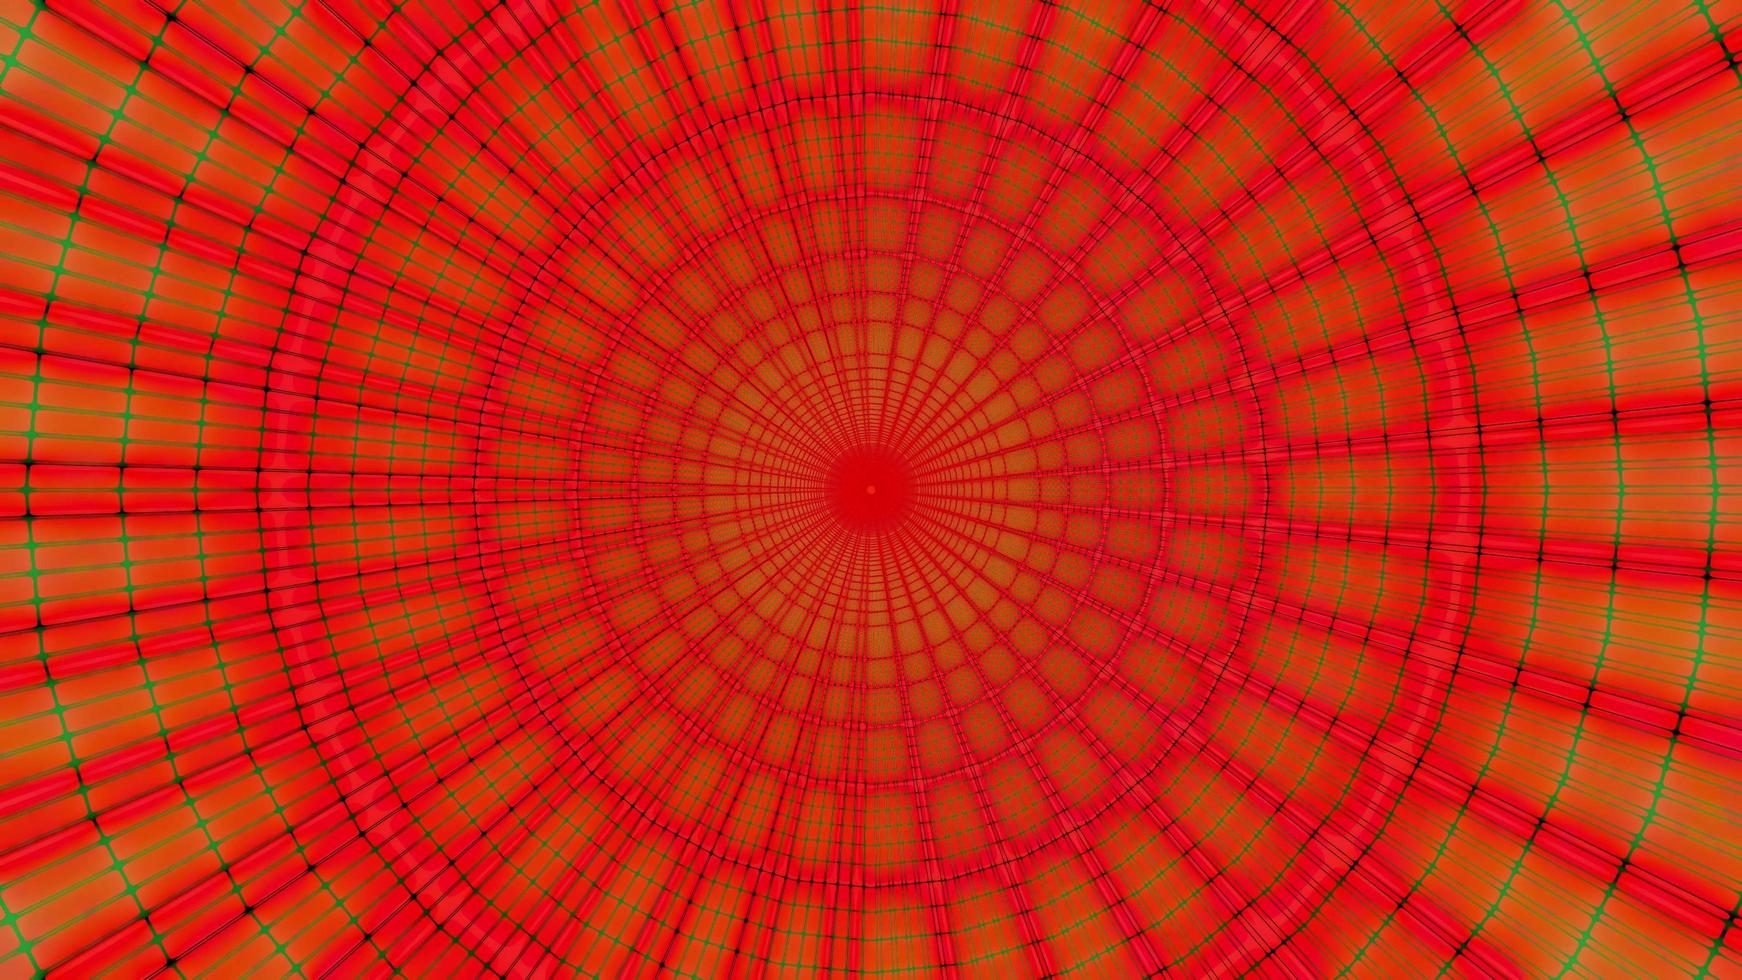 Green and red wireframe circles 3d illustration kaleidoscope design for background or wallpaper photo